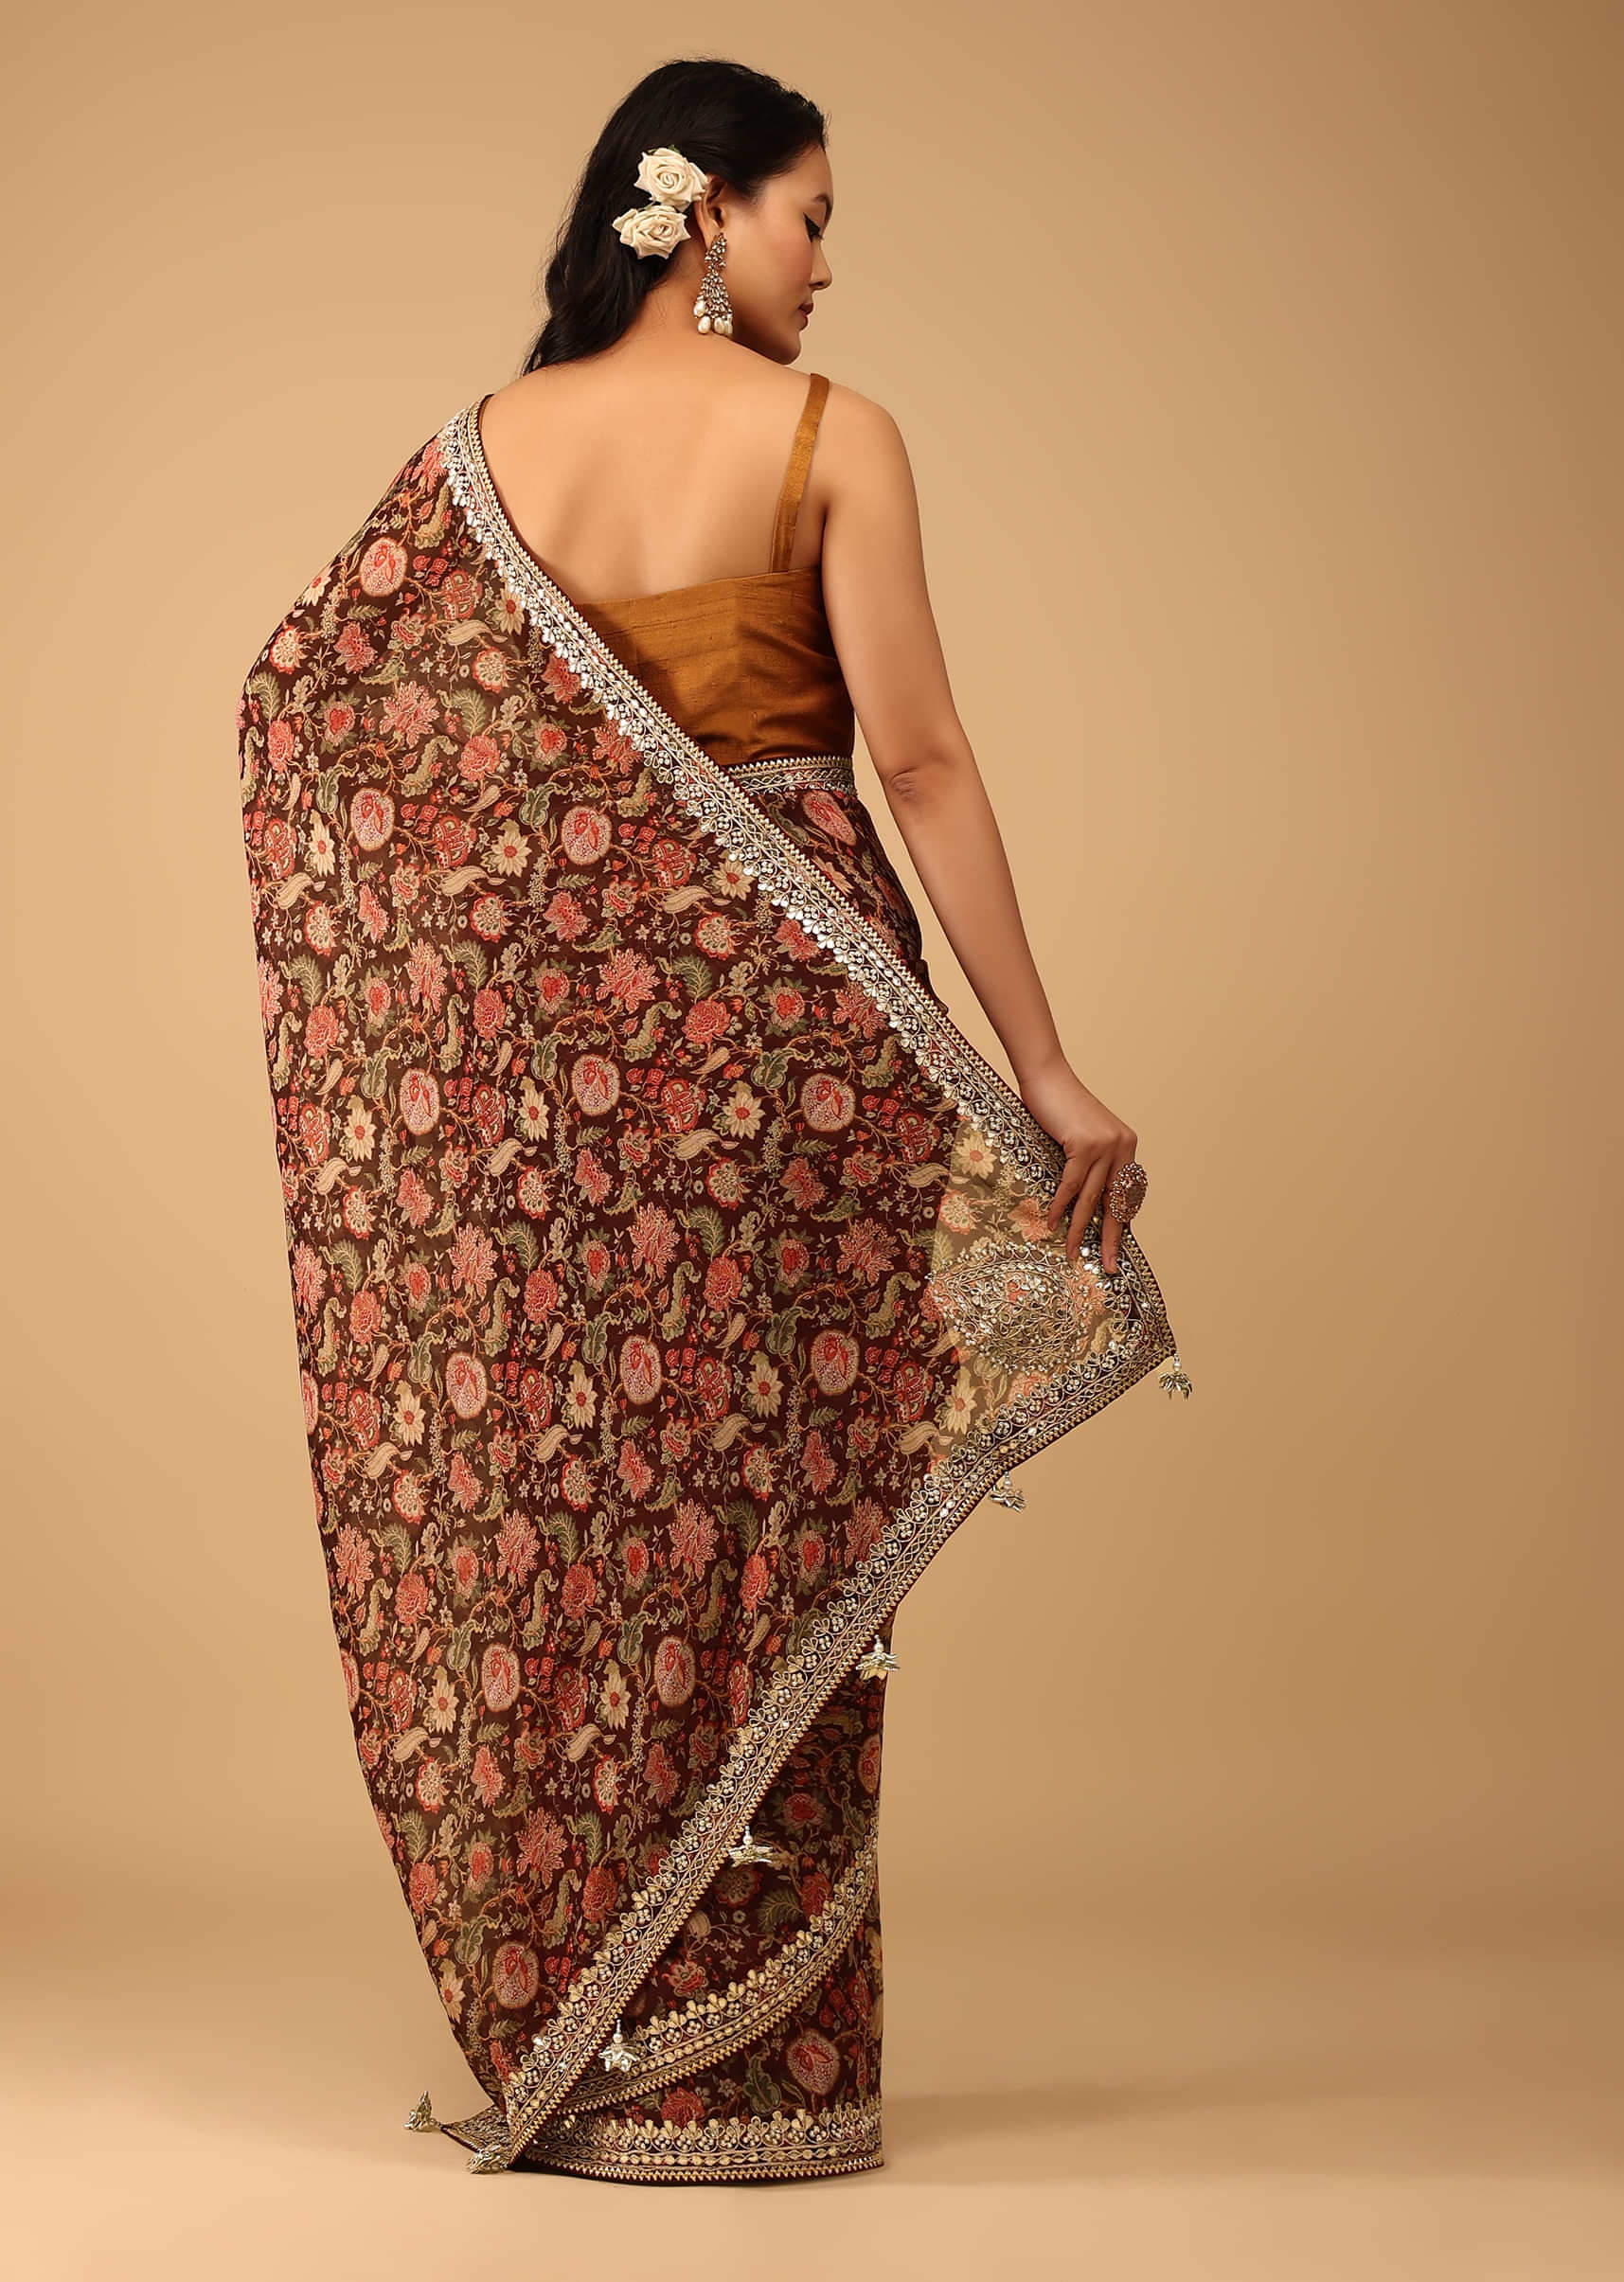 Brick Red Saree In Crepe With Floral Print And Embroidery